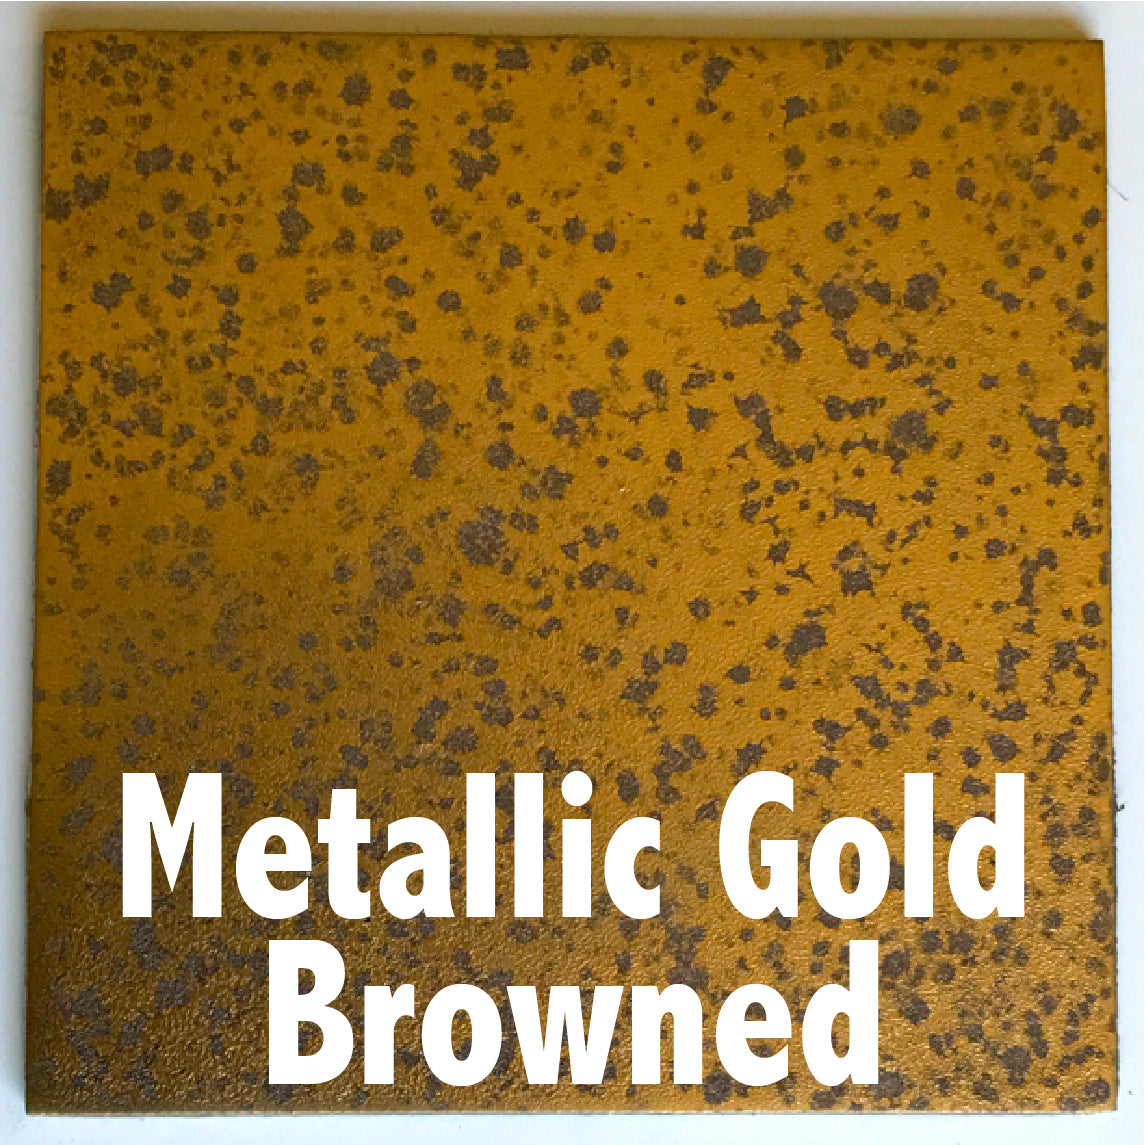 Hammered Gold and Metallic Gold Browned 3 x 3 Metal Art Color Swatch –  Functional Sculpture llc